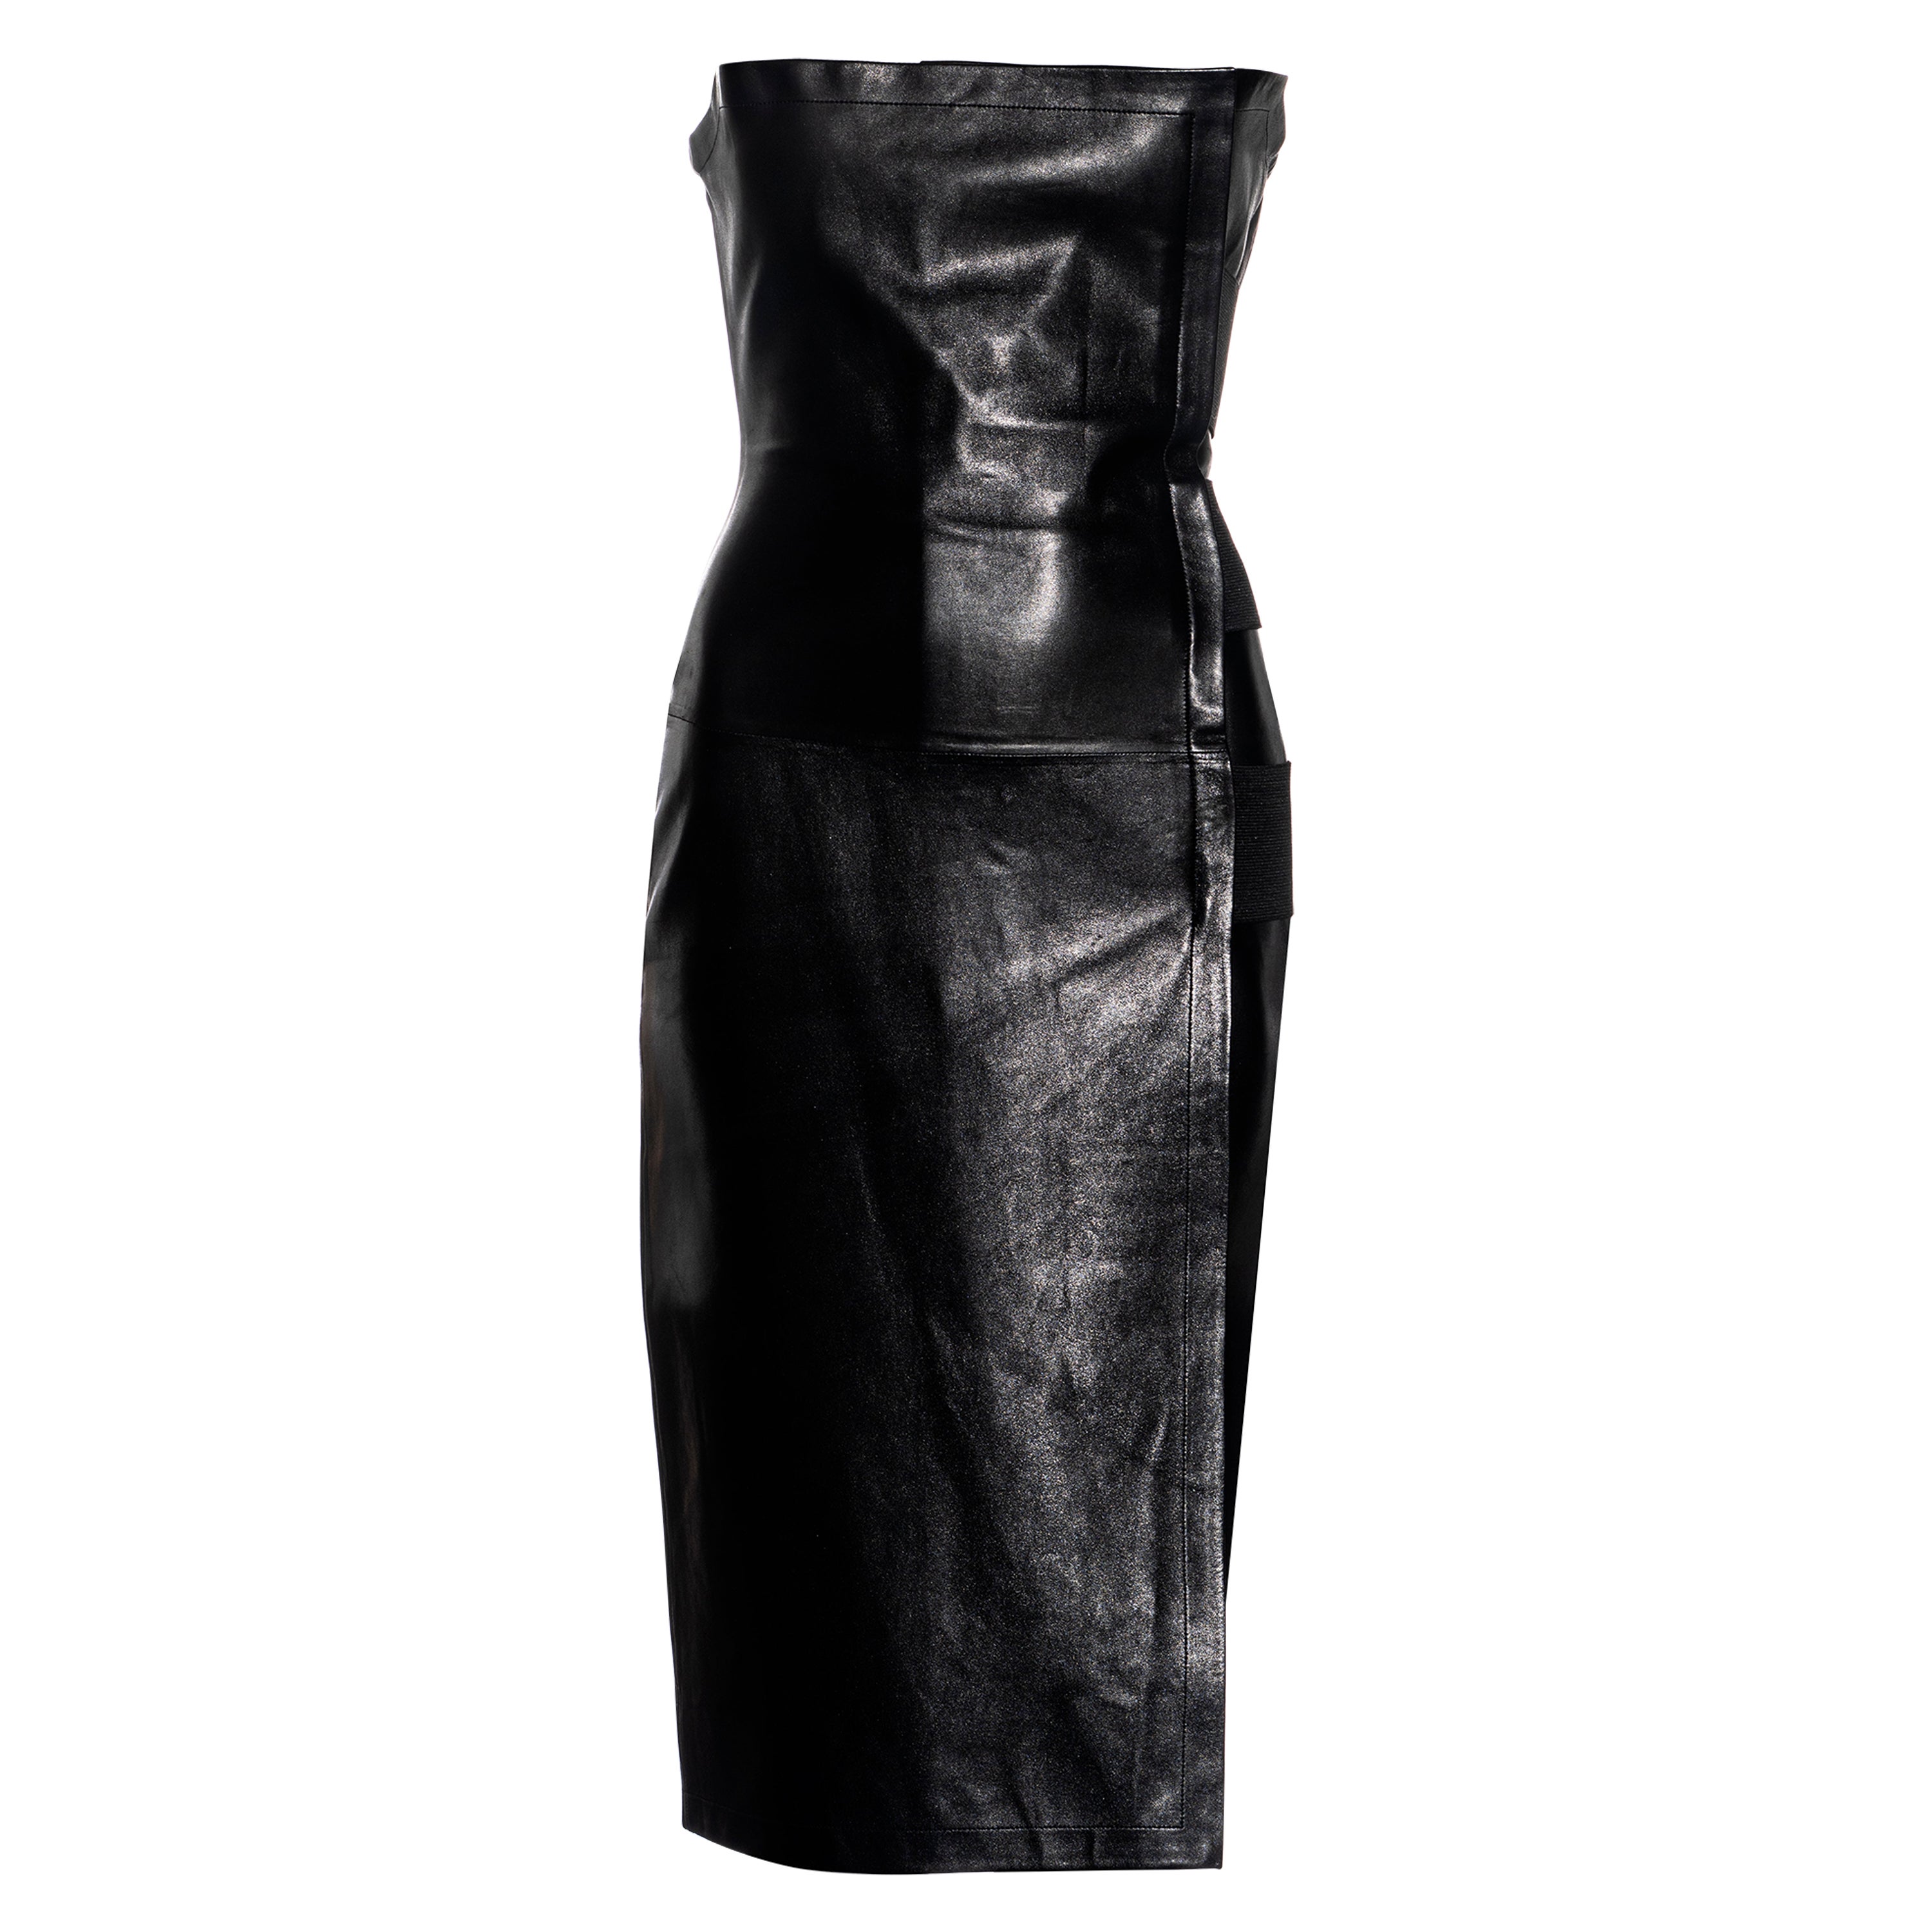 Yves Saint Laurent by Tom Ford black leather strapless wrap dress, ss 2001